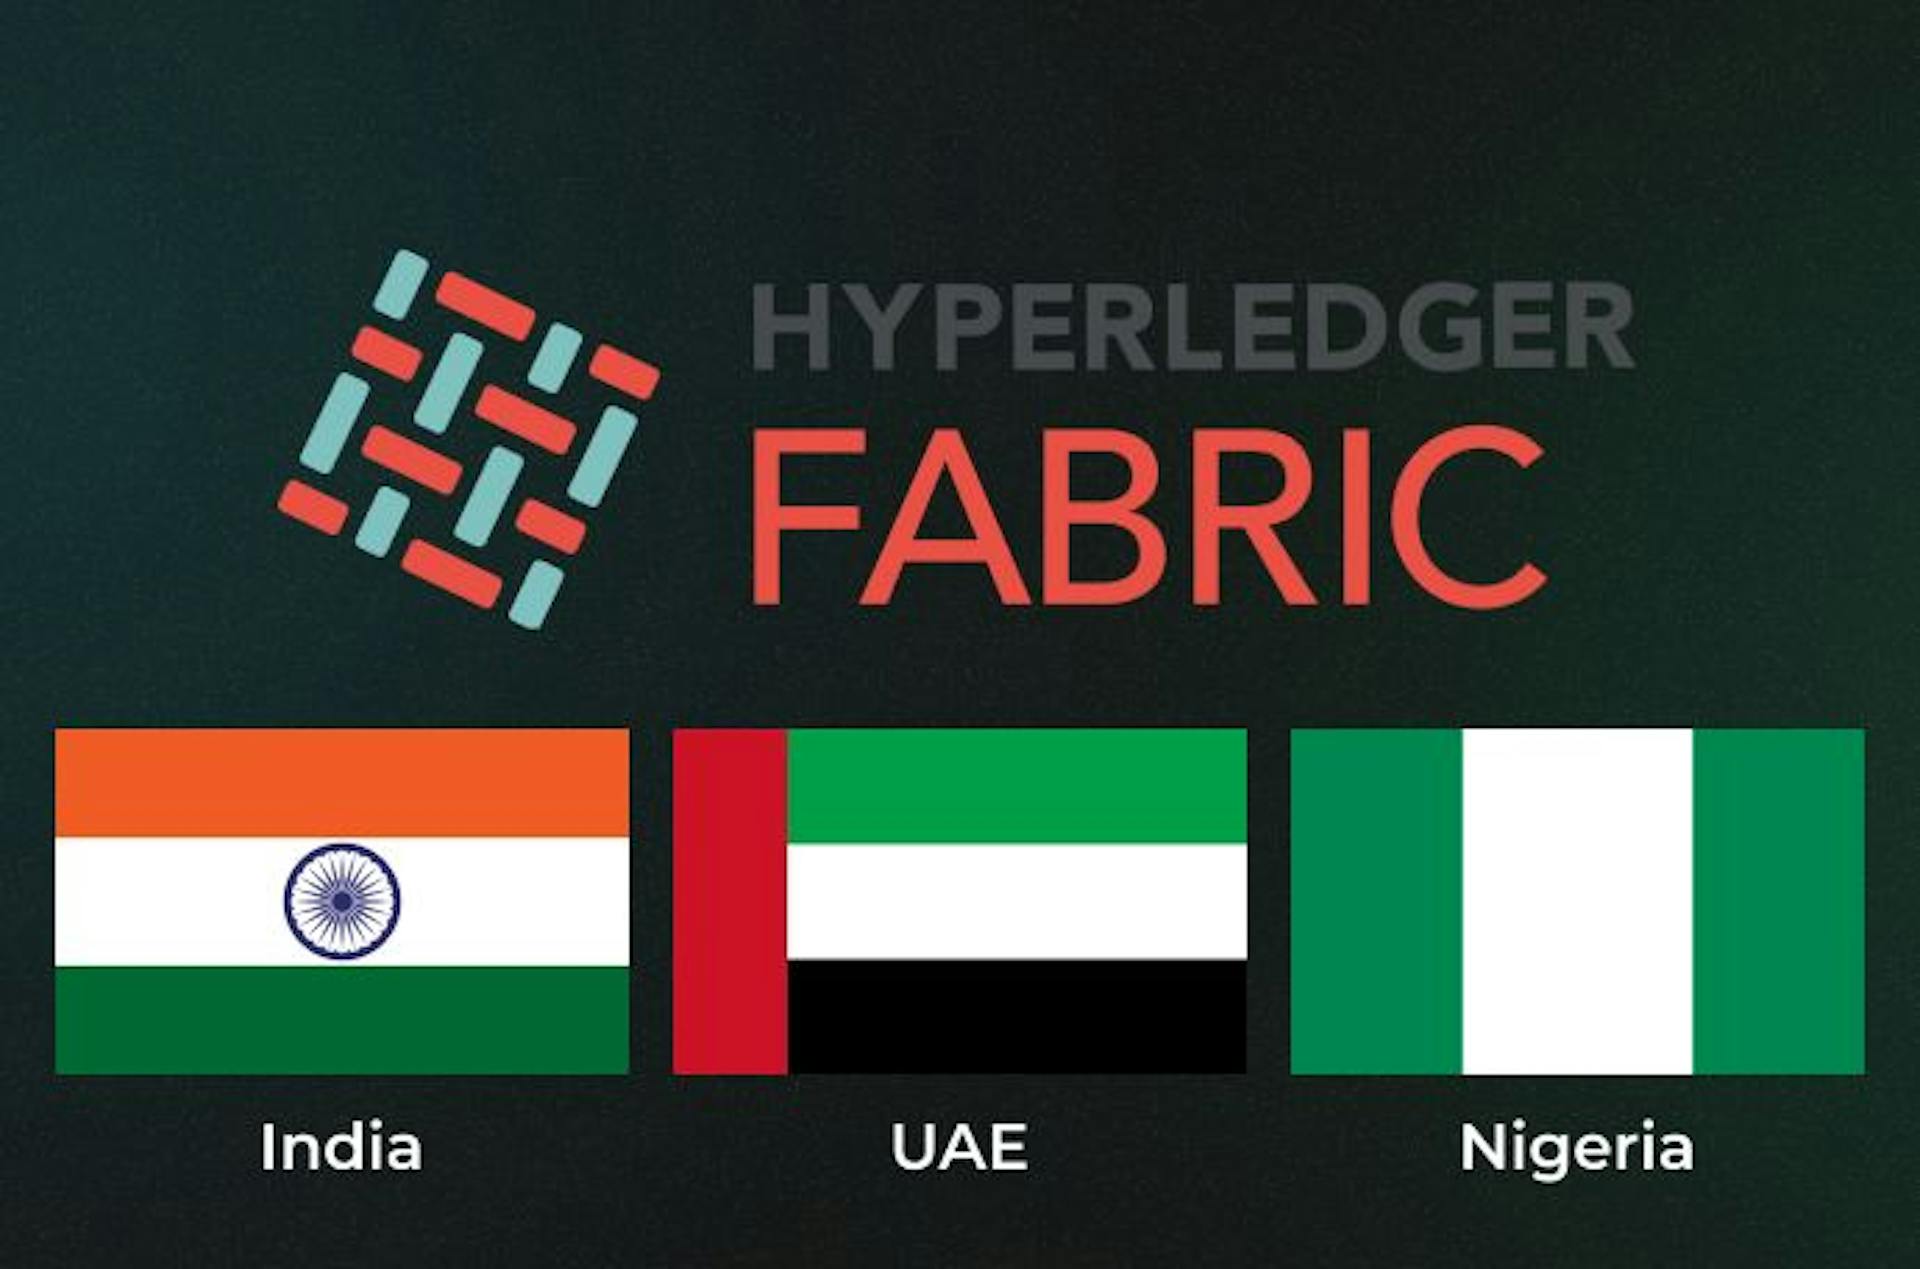 Some countries that use Hyperledger Fabric to implement CBDC